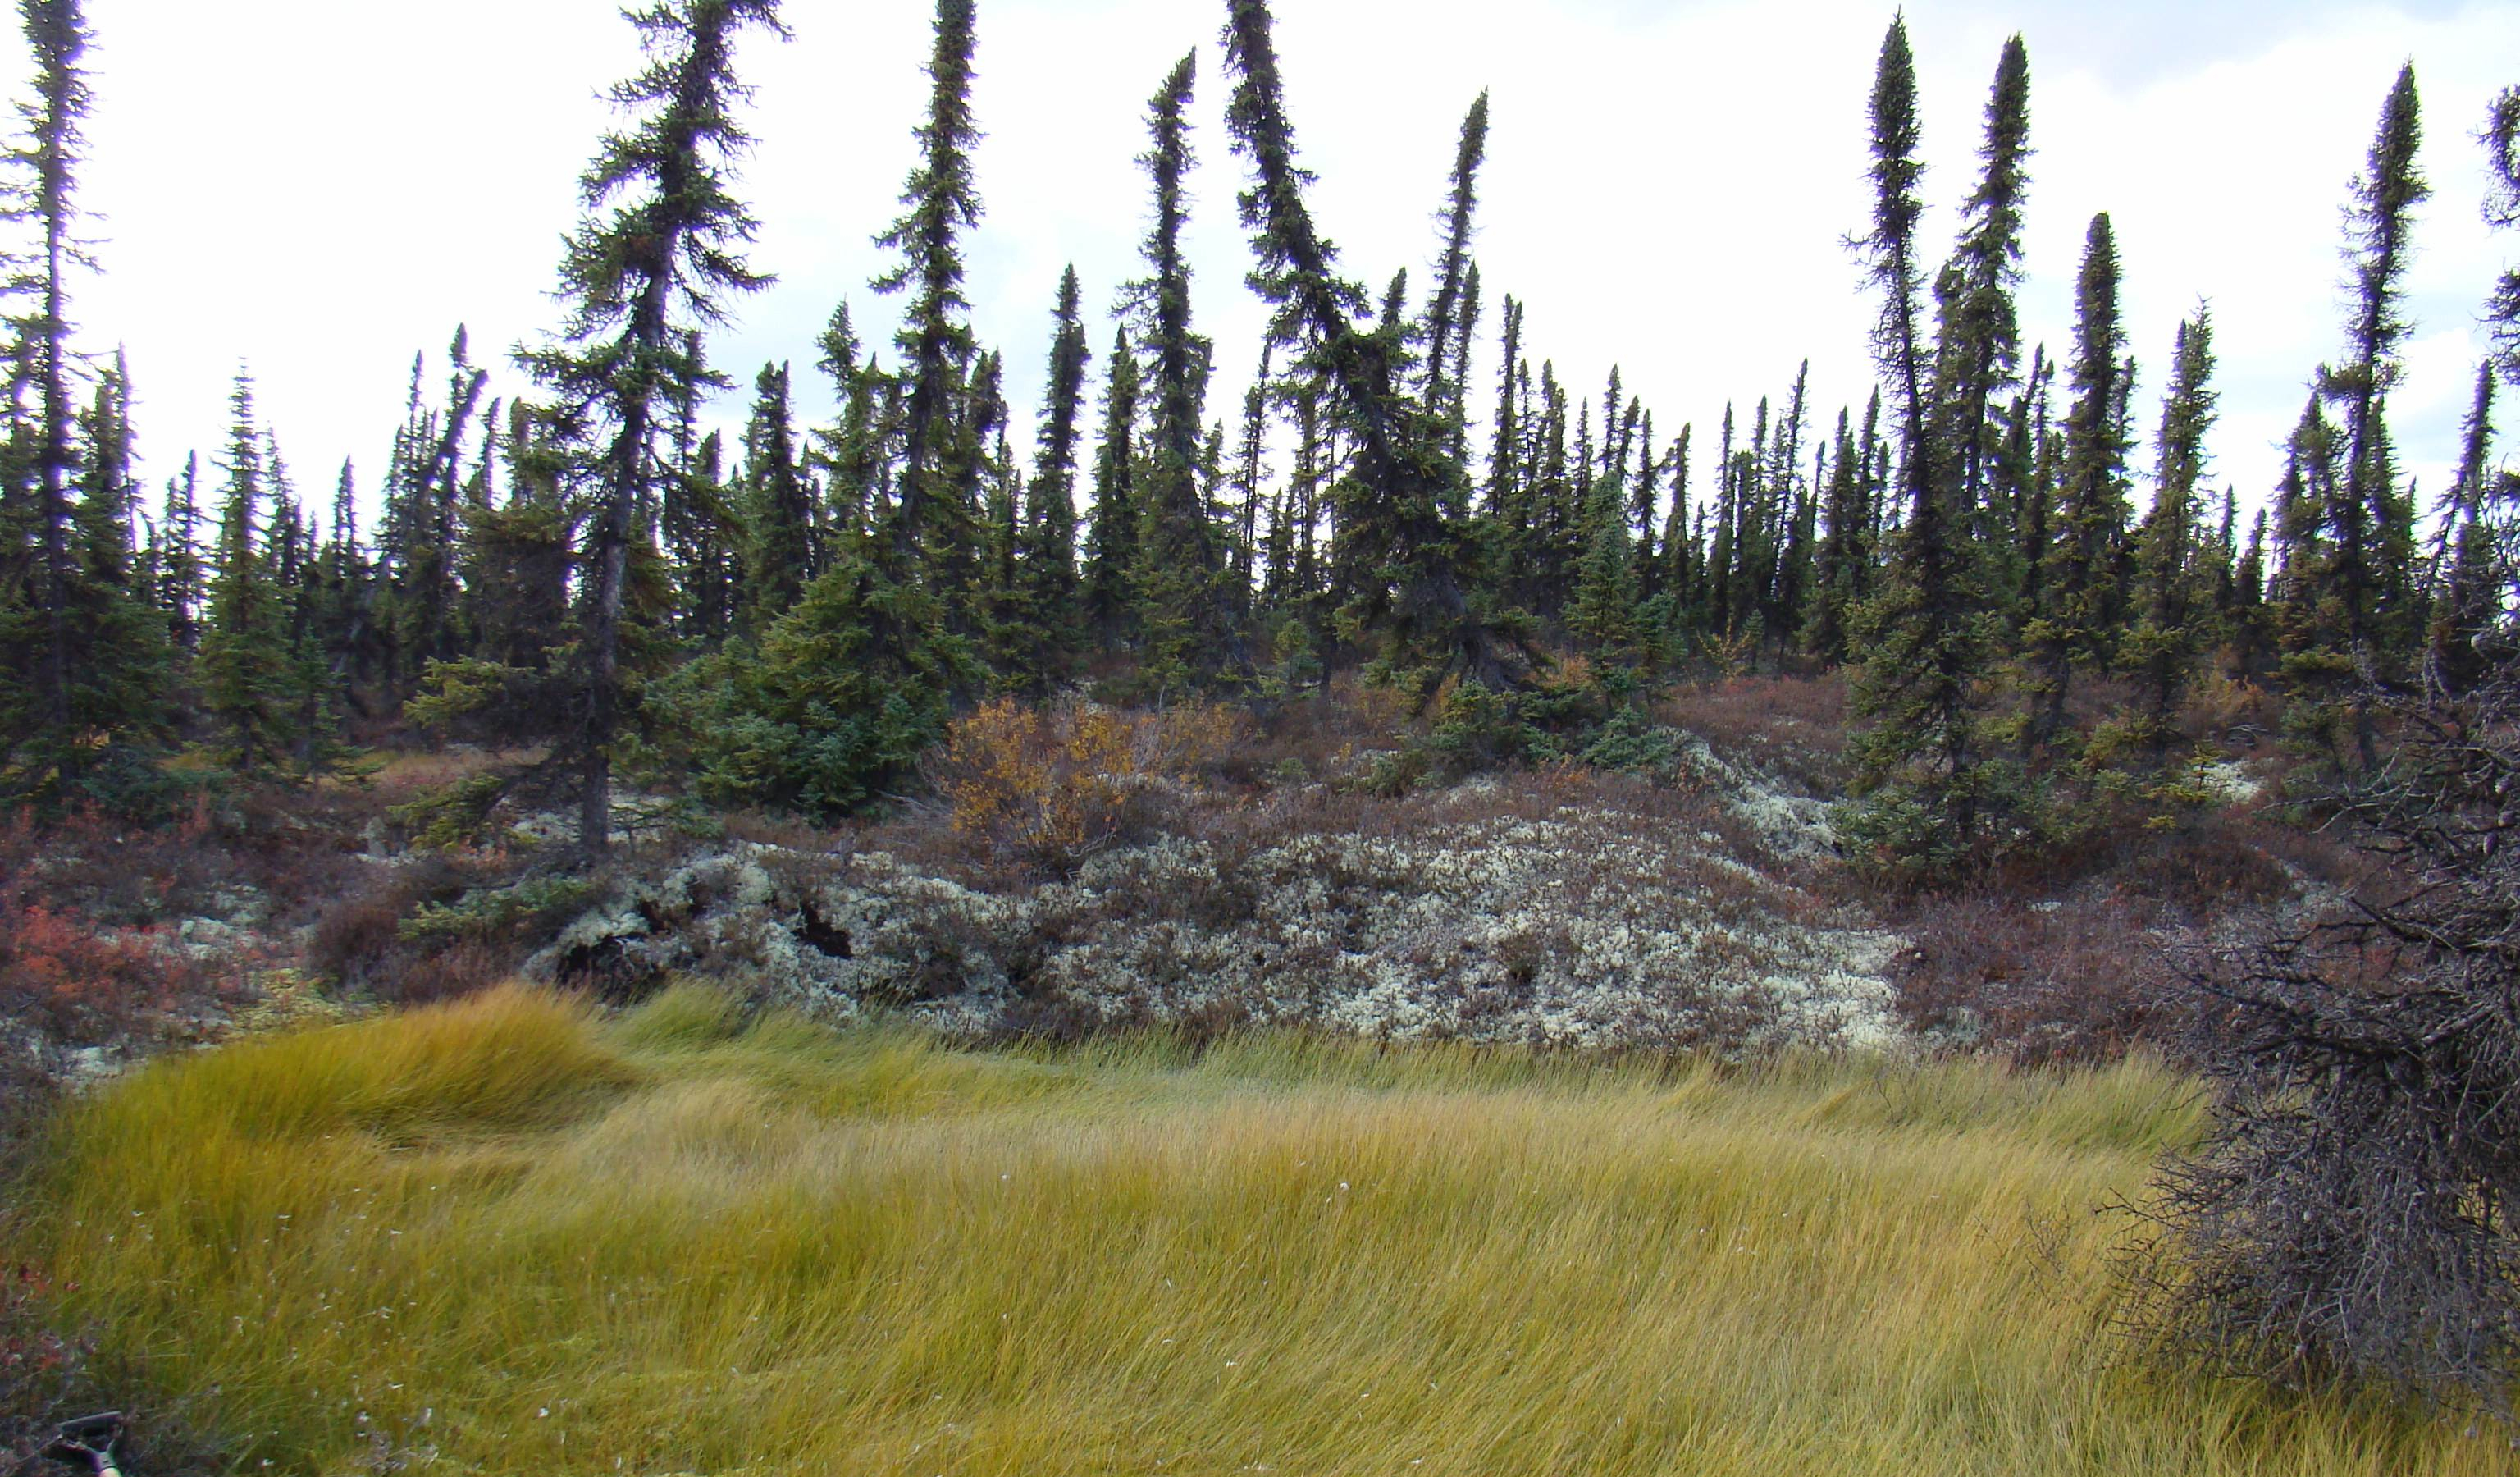 A photograph of trees in a forest in Alaska, with several leaning over in different directions due to subsidence.